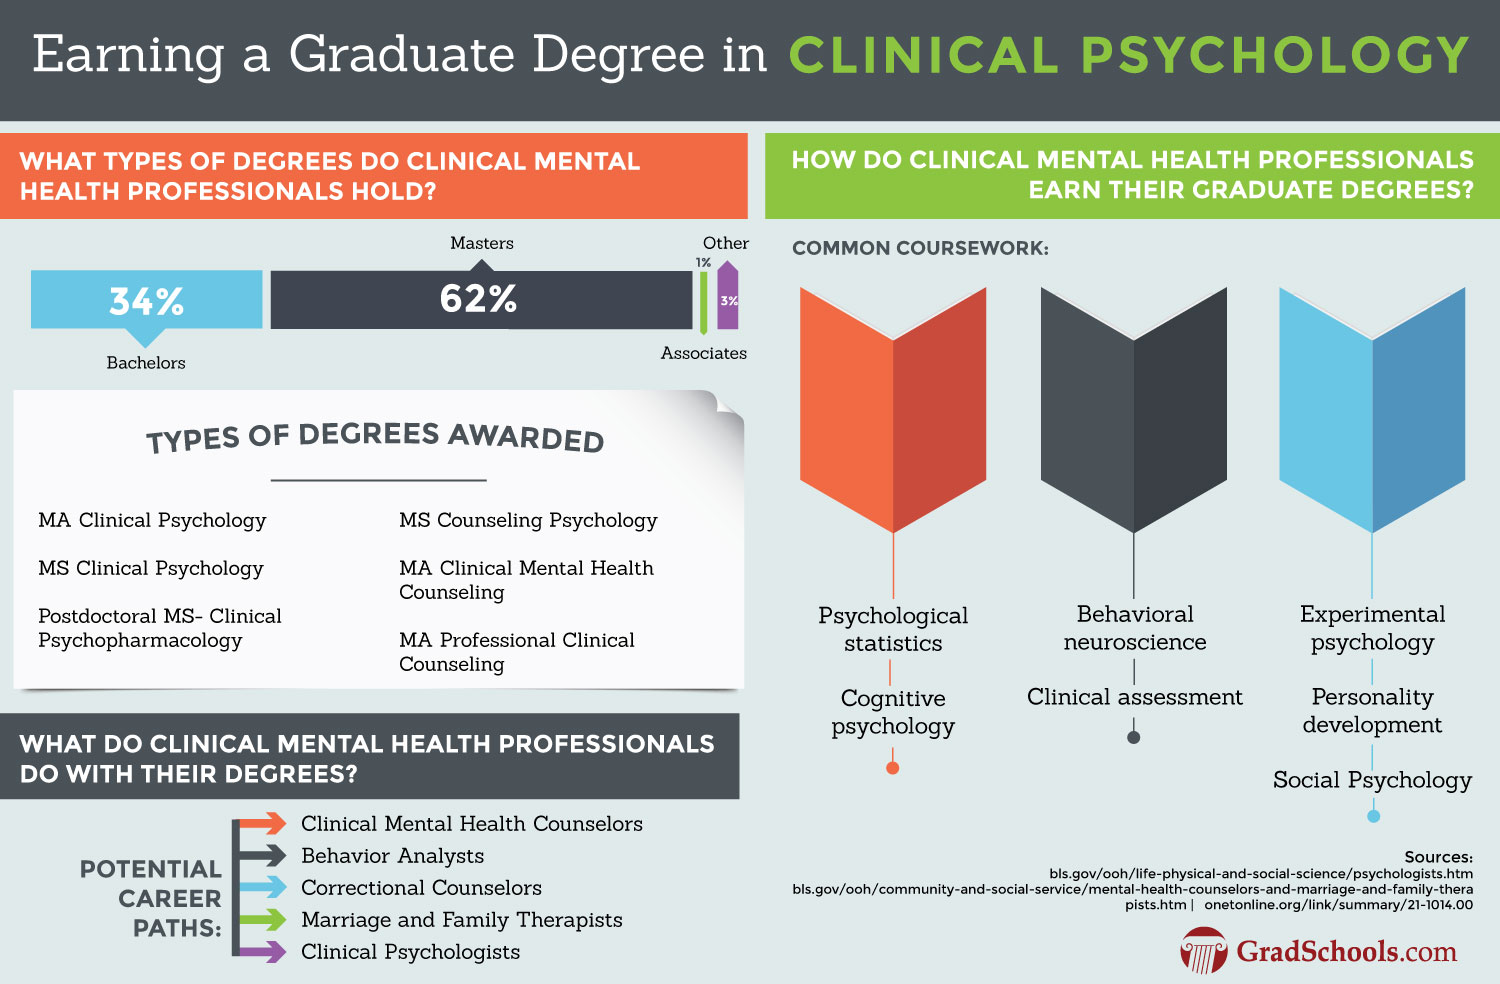 California Masters in Clinical Psychology Degree Programs 2020+